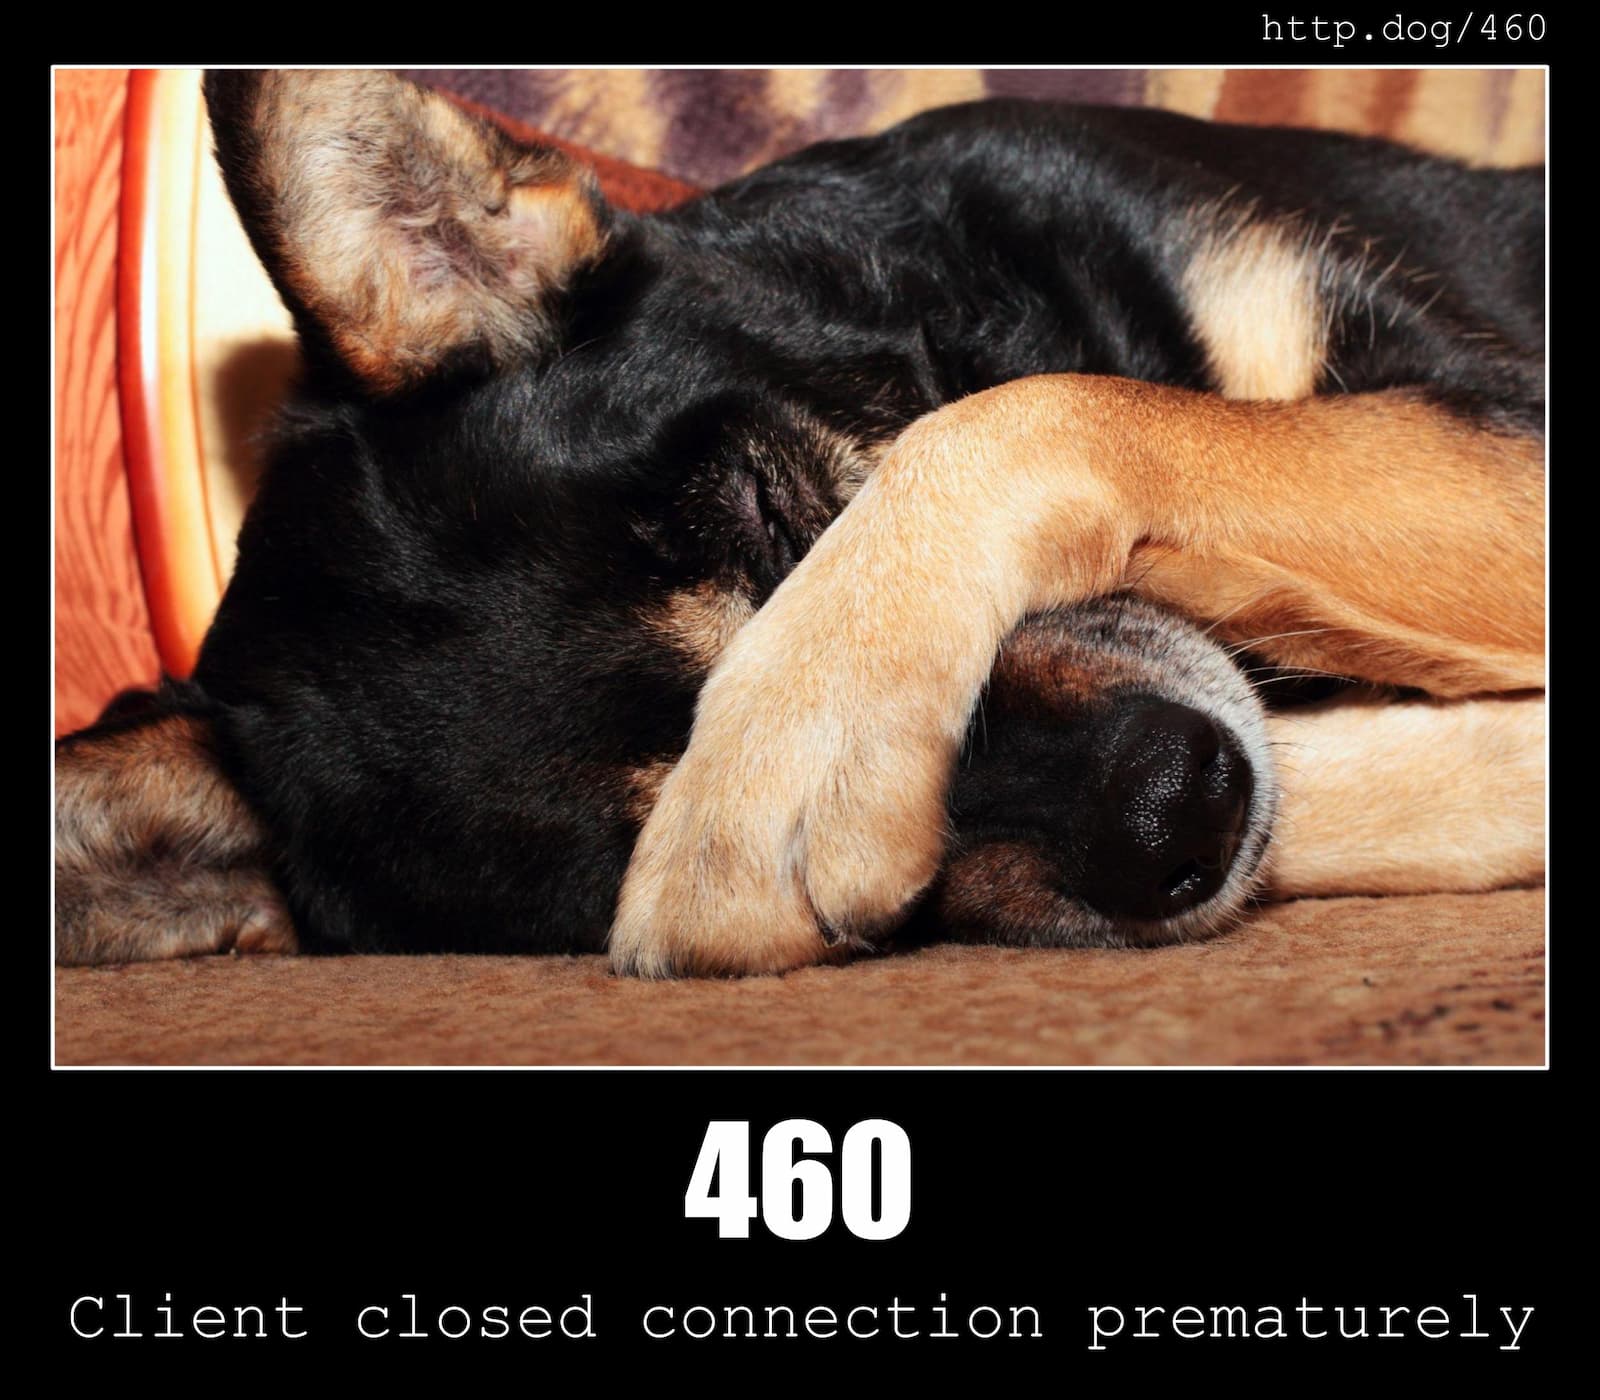 HTTP Status Code 460 Client closed connection prematurely